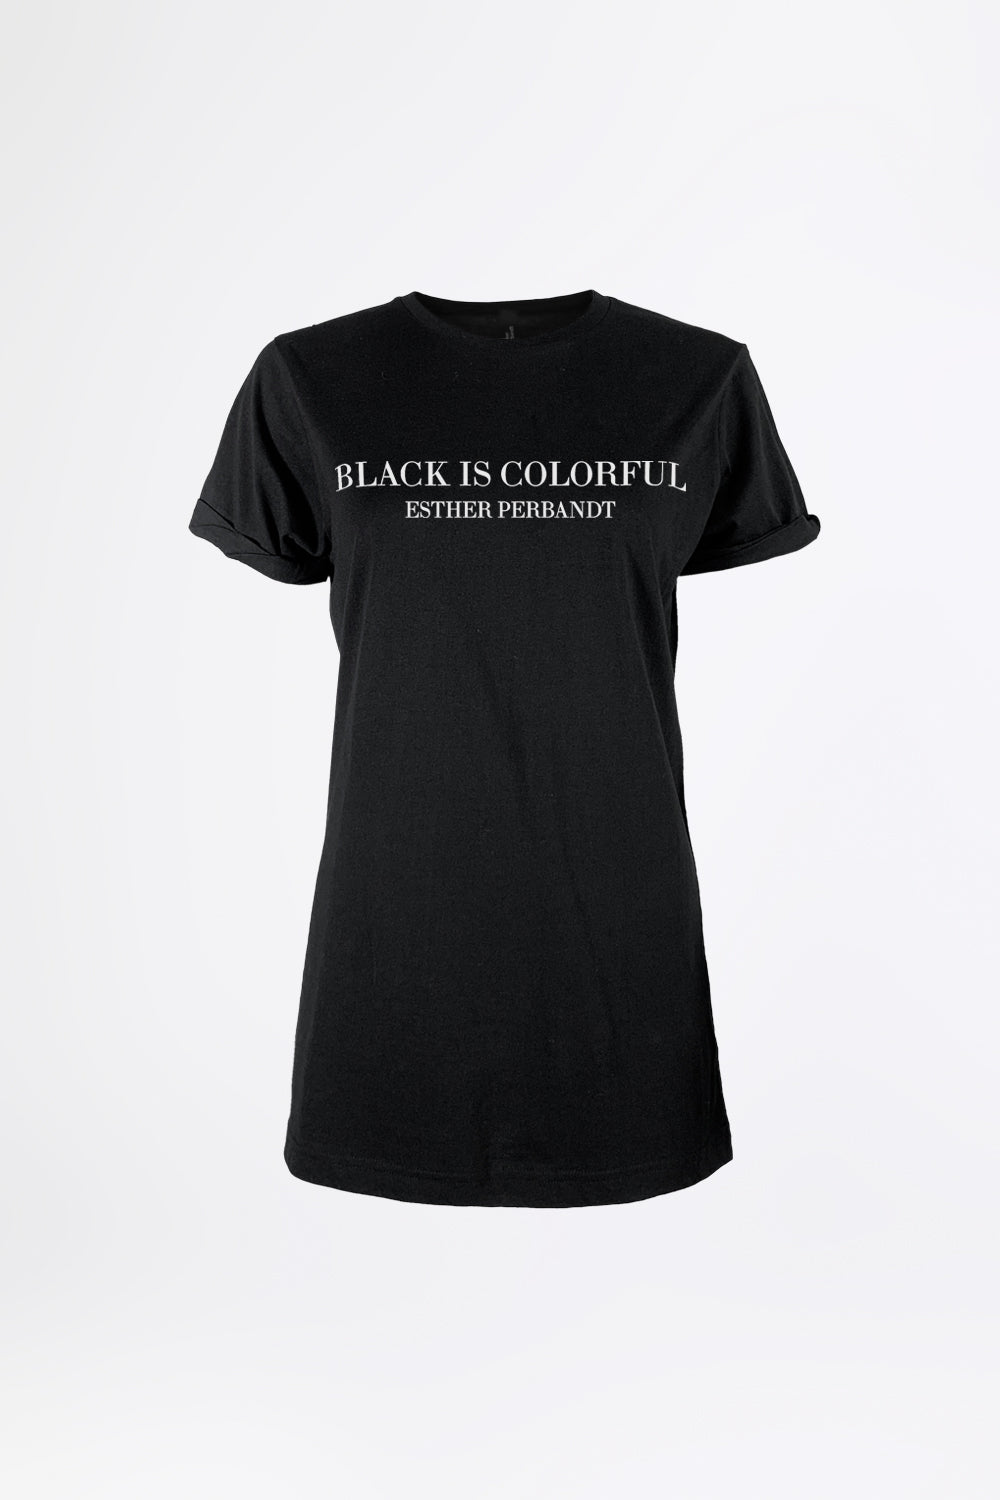 BLACK IS COLORFUL - Statement T-Shirt